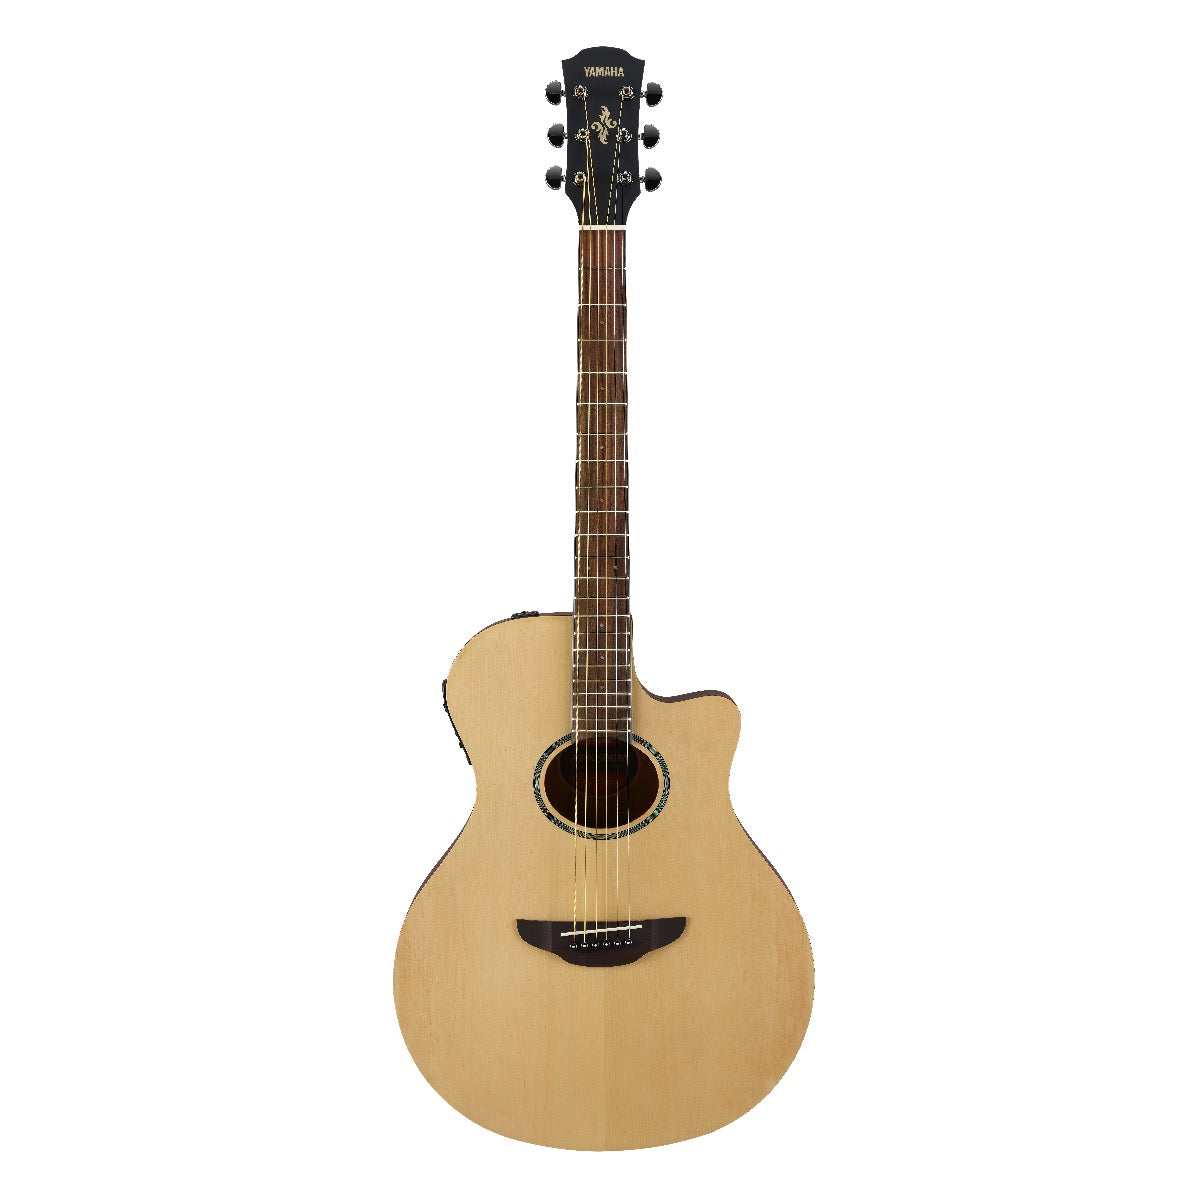 Yamaha APX600OVS Thinline Acoustic-Electric Guitar - Natural Satin, View 2